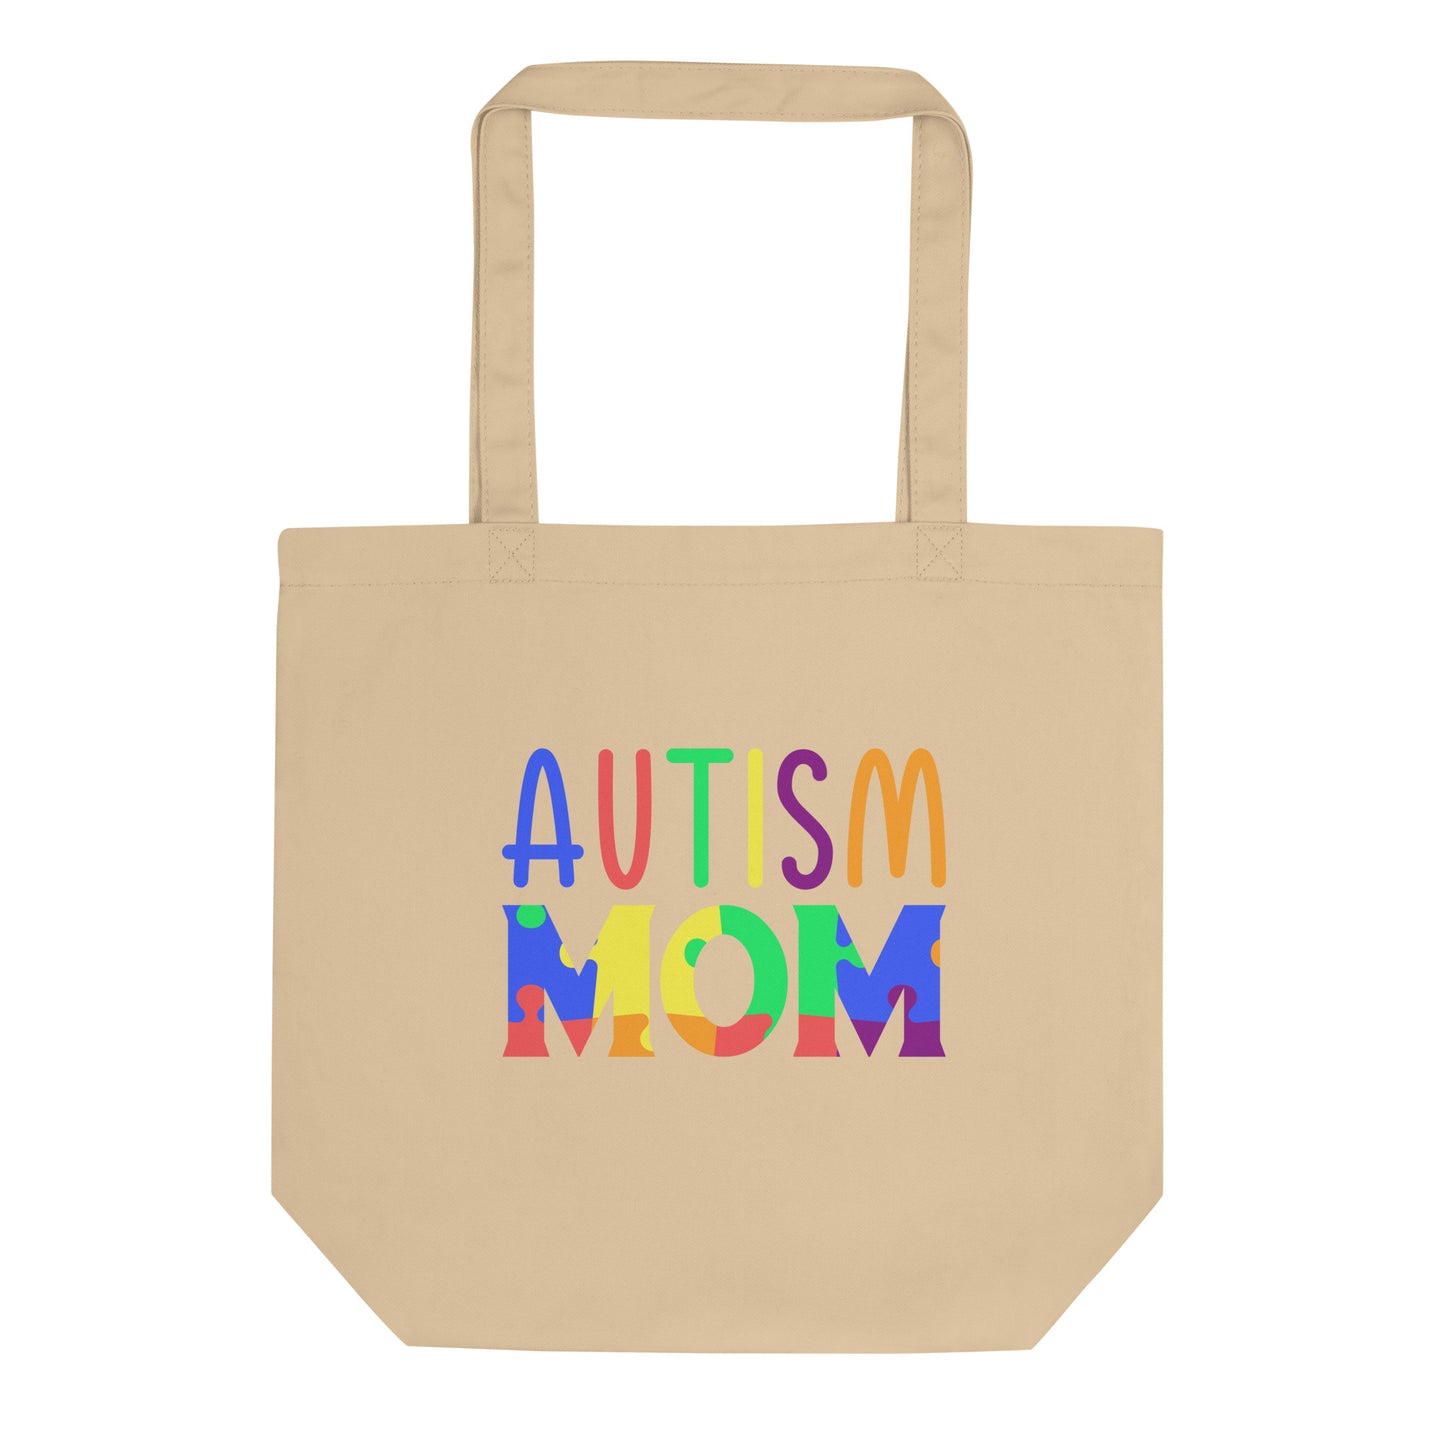 Autism Mom Tote Bag Oyster